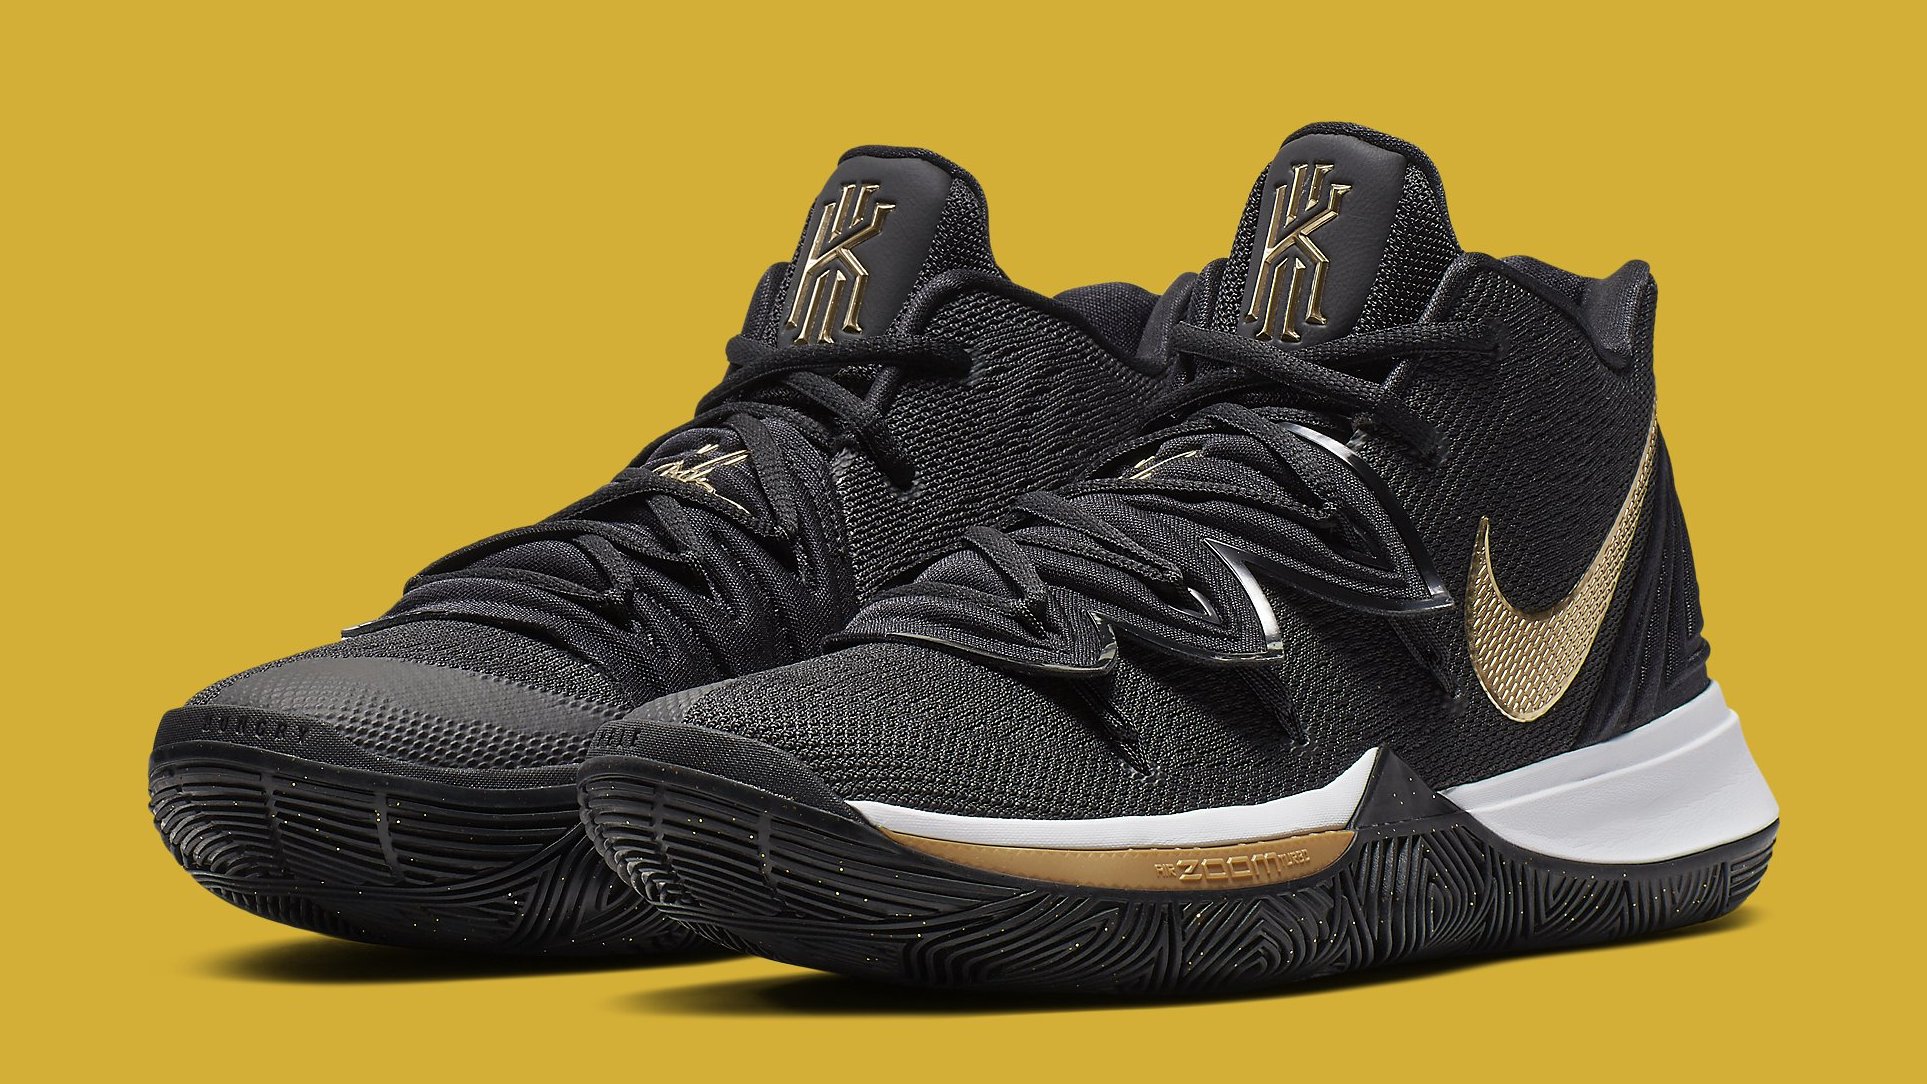 kyrie irving shoes 4 black and gold